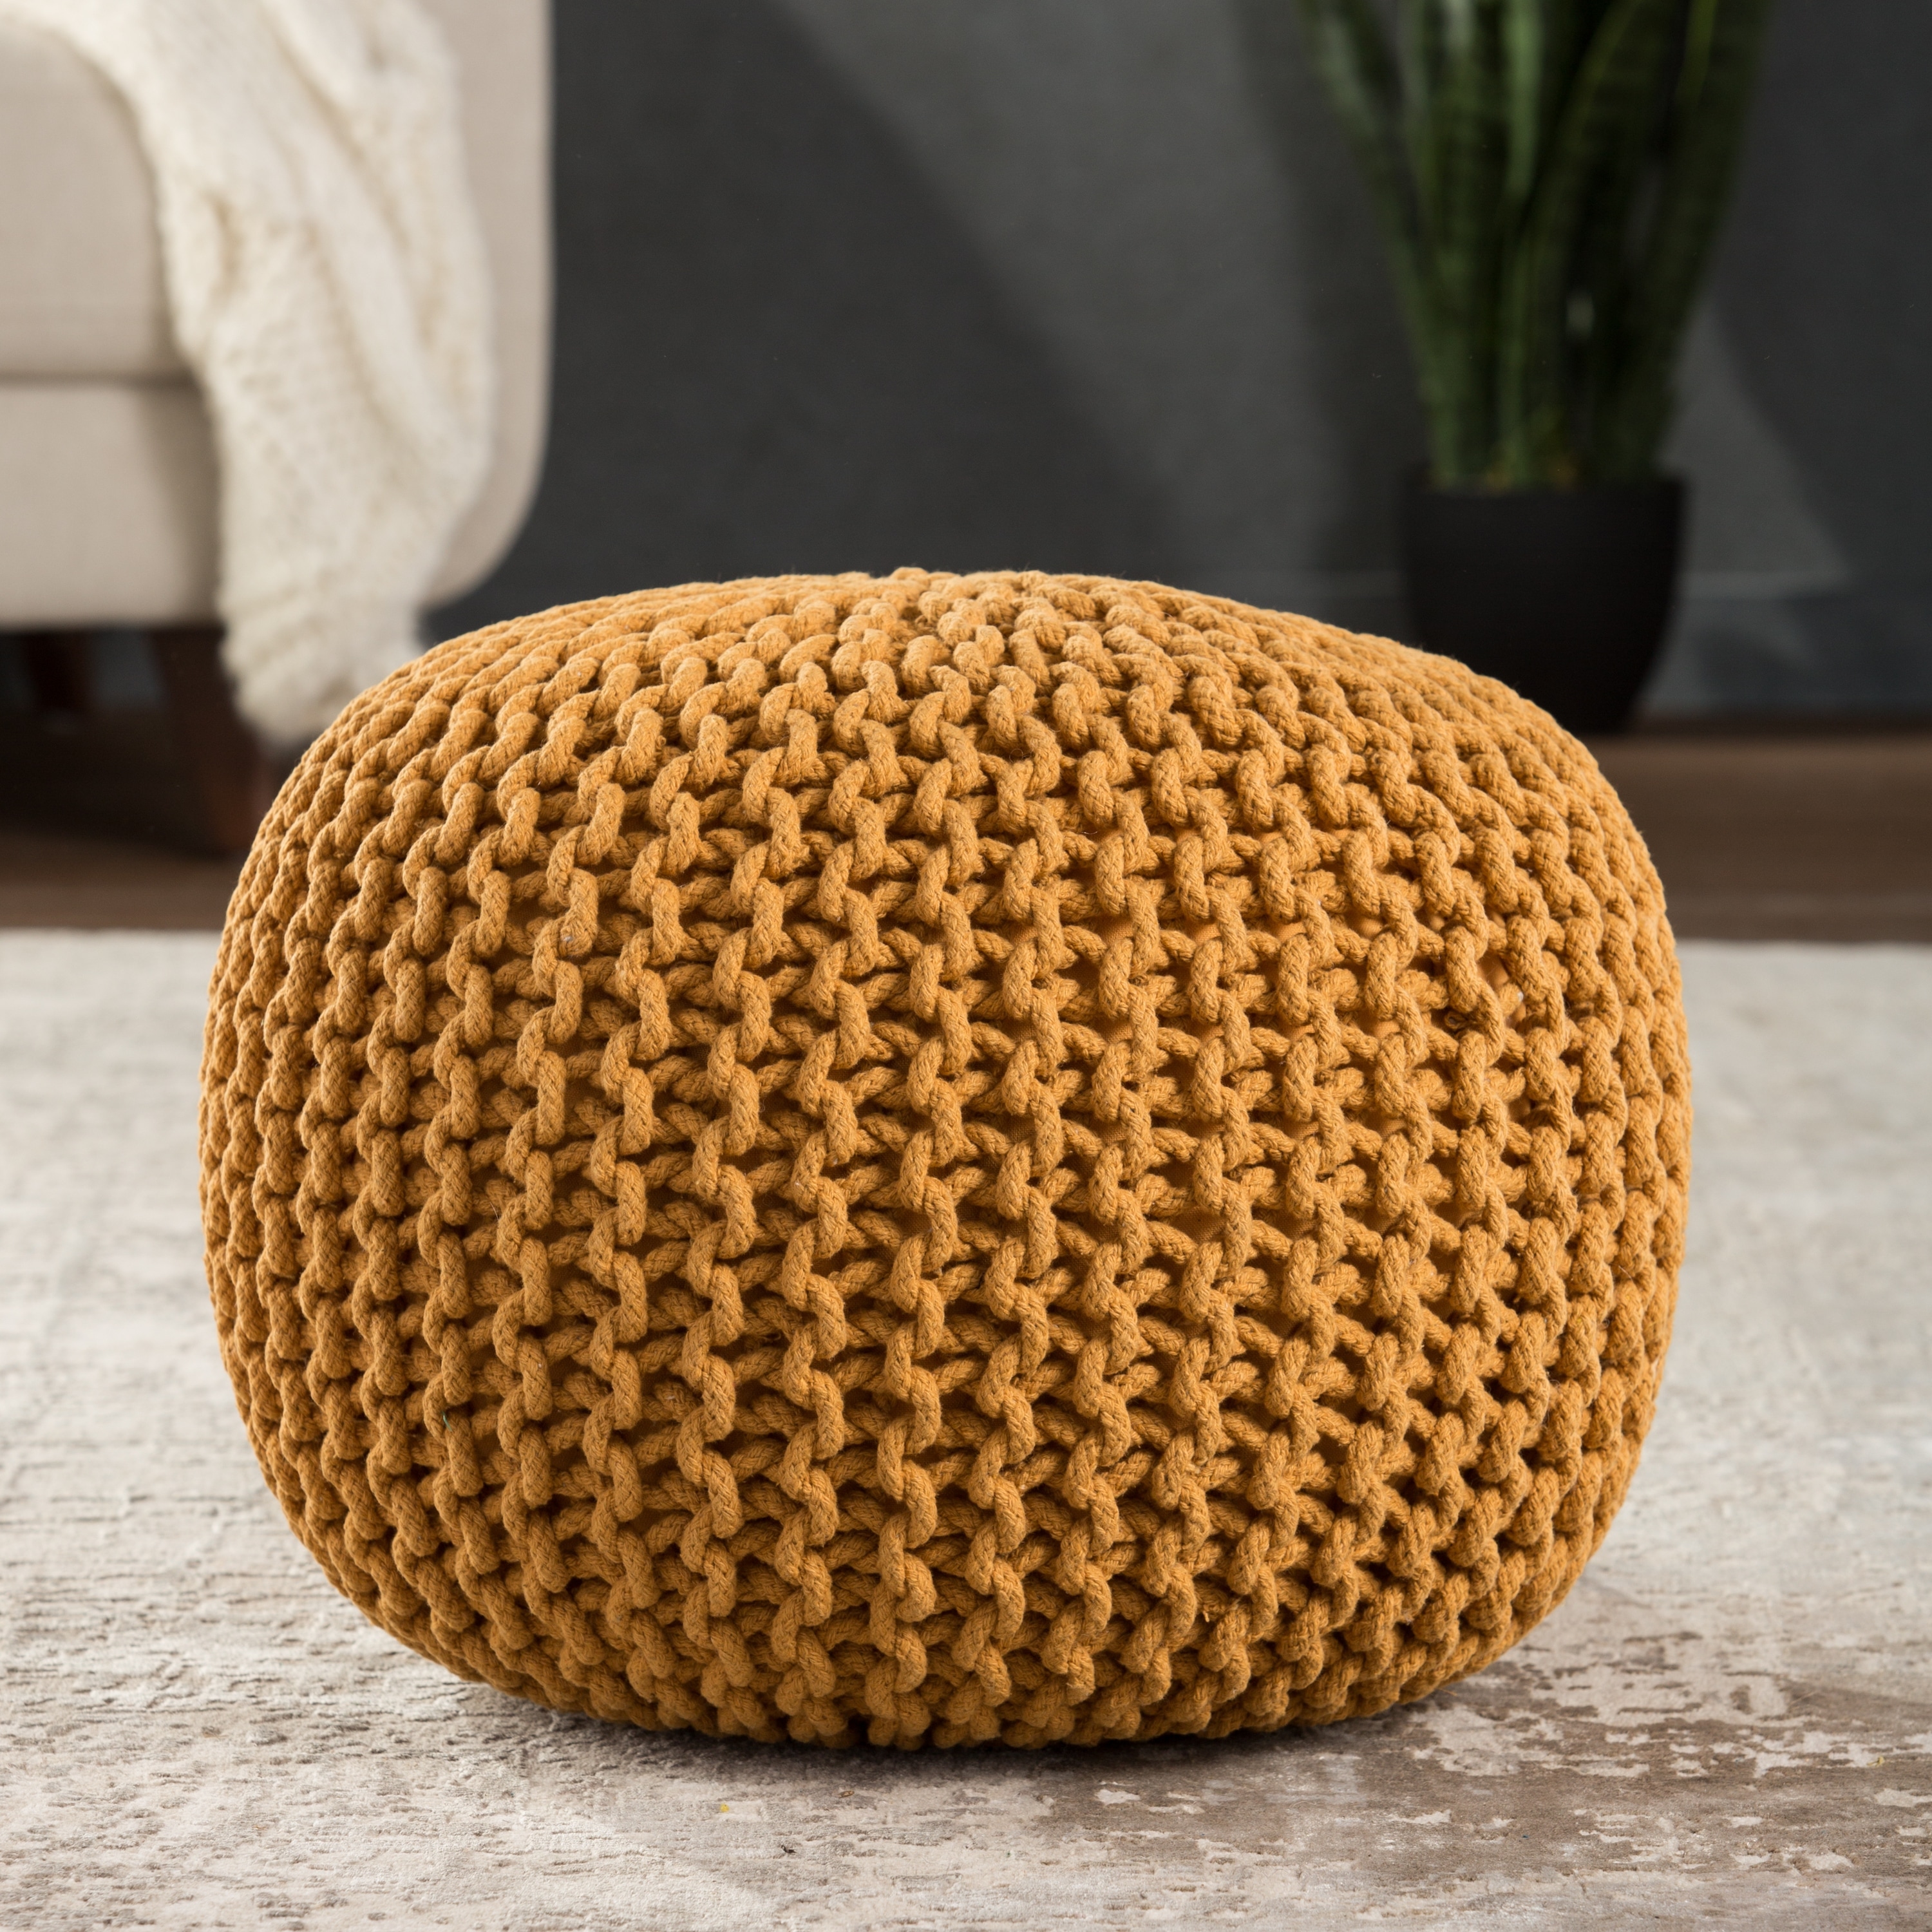 Joita Indoor Outdoor Pouf CORAL REEF Zipper Cover with Luxury Polyfil  Stuffing 17 x 17 x 17 - Bed Bath & Beyond - 35631522